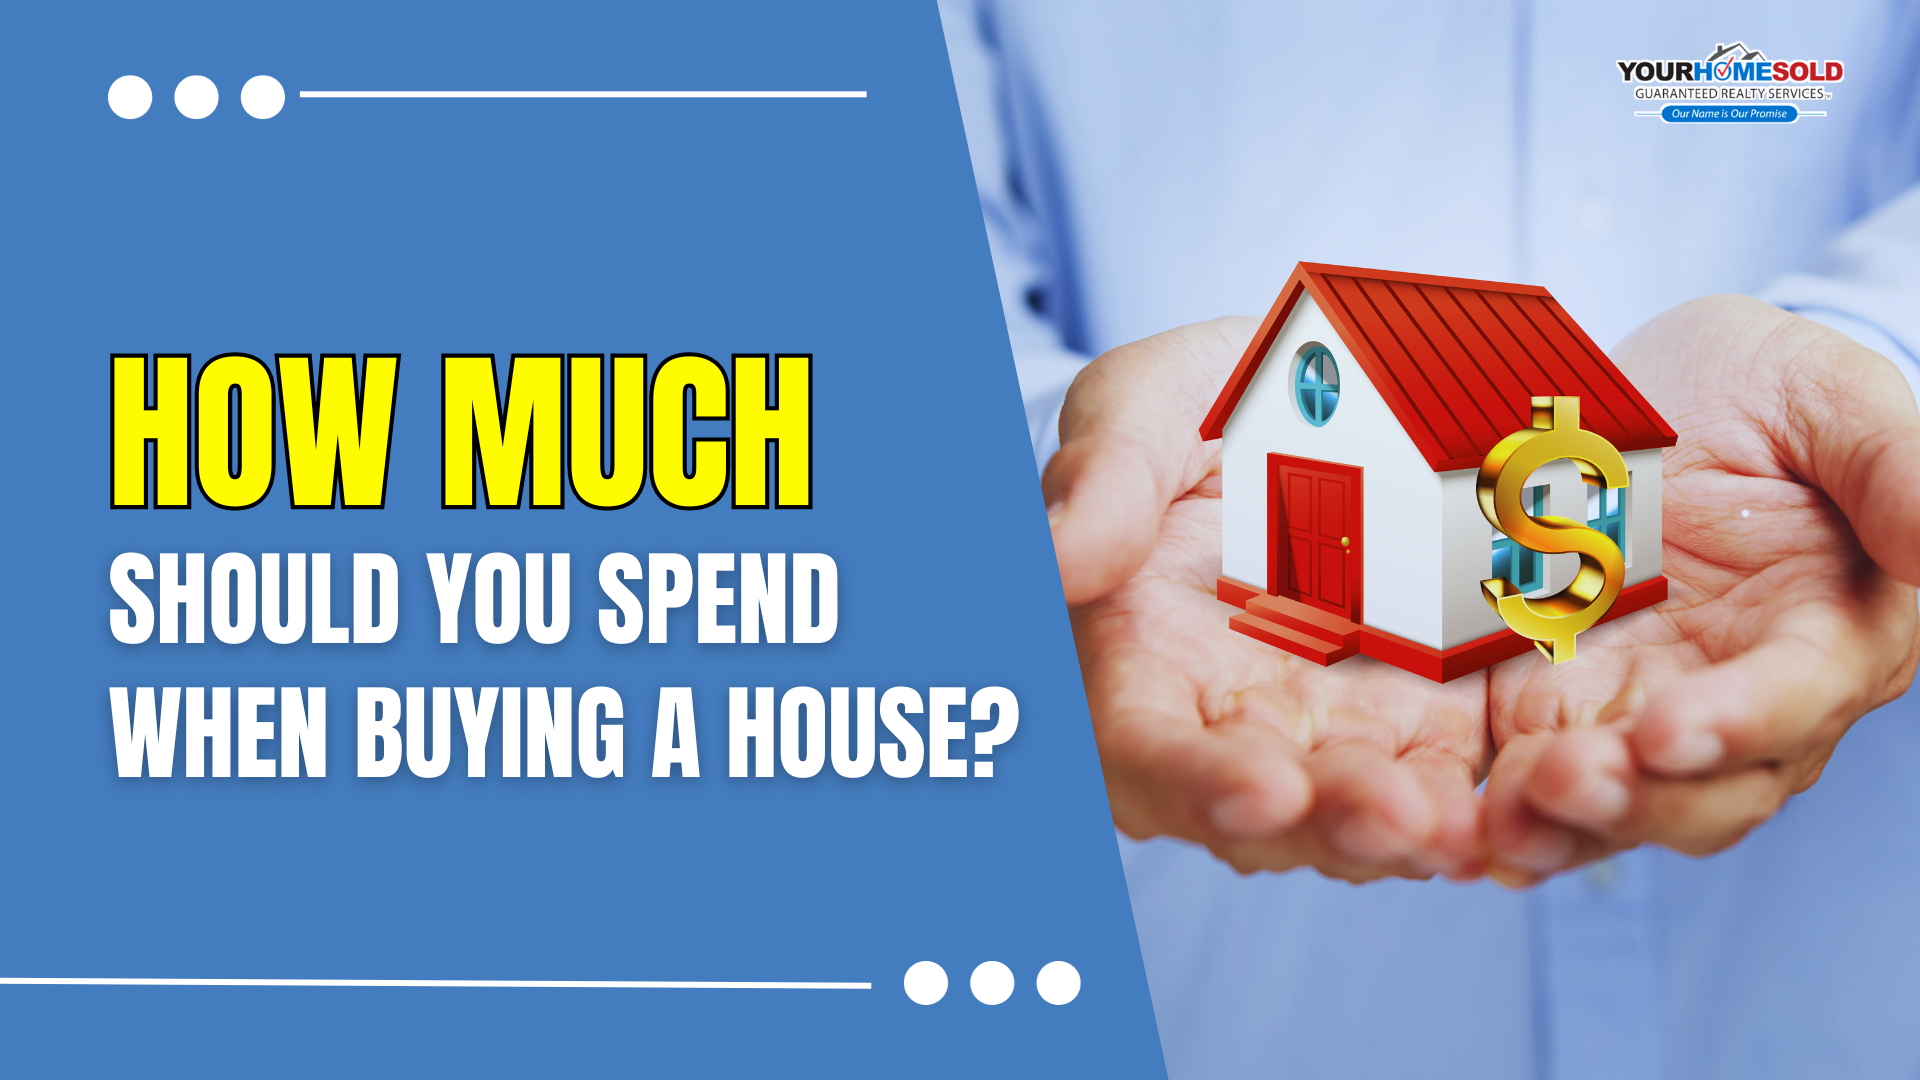 HOW MUCH SHOULD YOU SPEND WHEN BUYING A HOUSE?